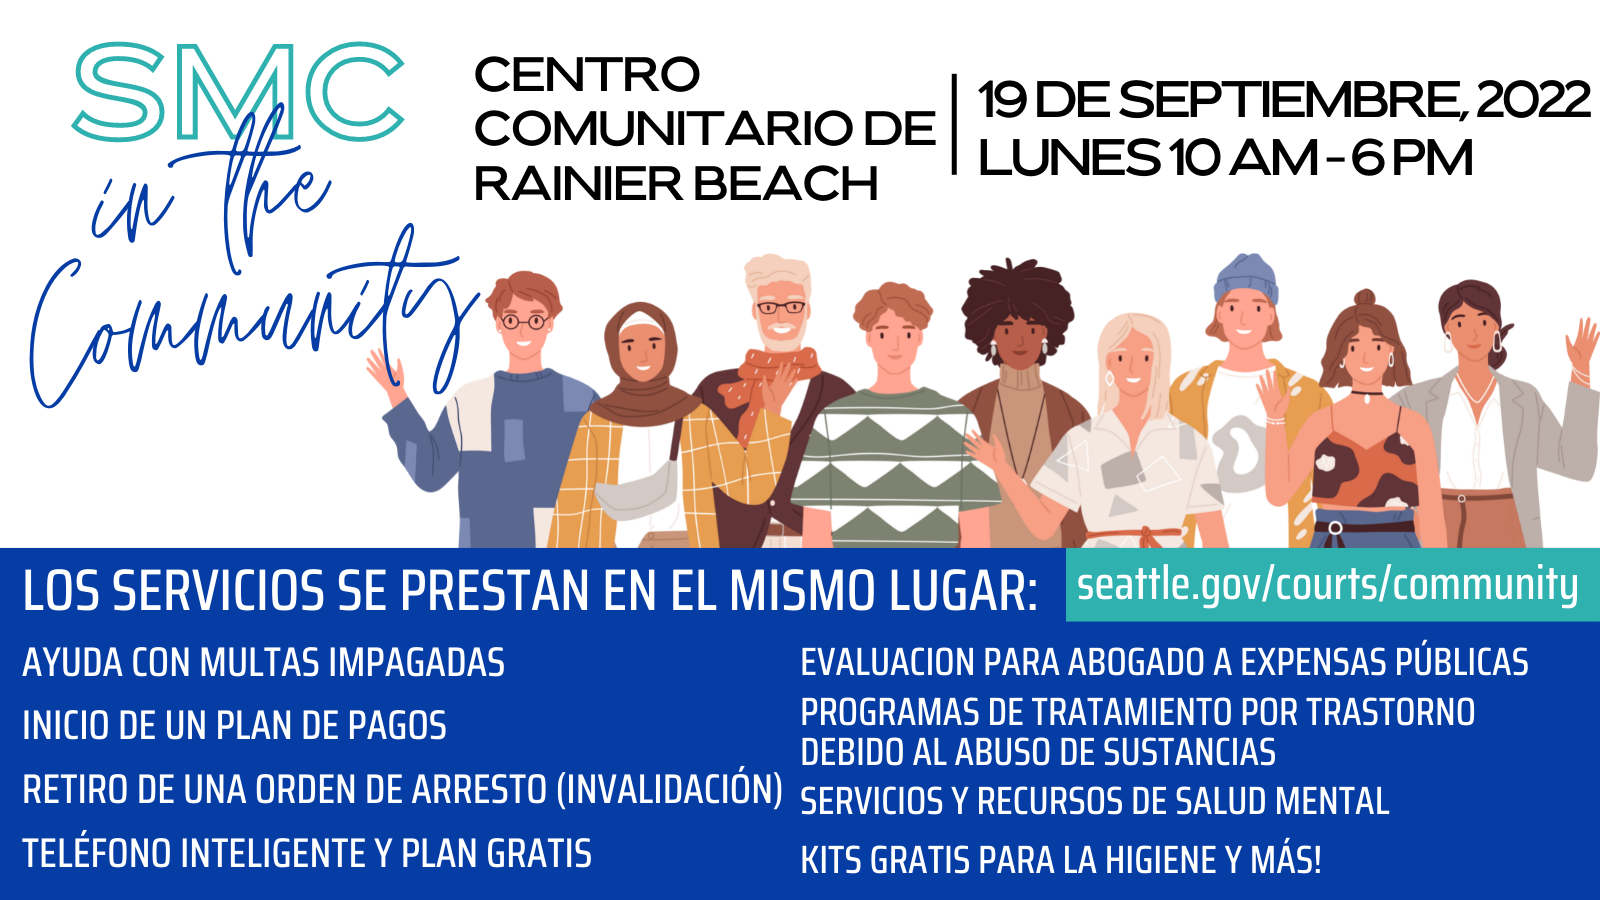 SMC in the Community event banner with a group of smiling and waving cartoon people and event info in Spanish